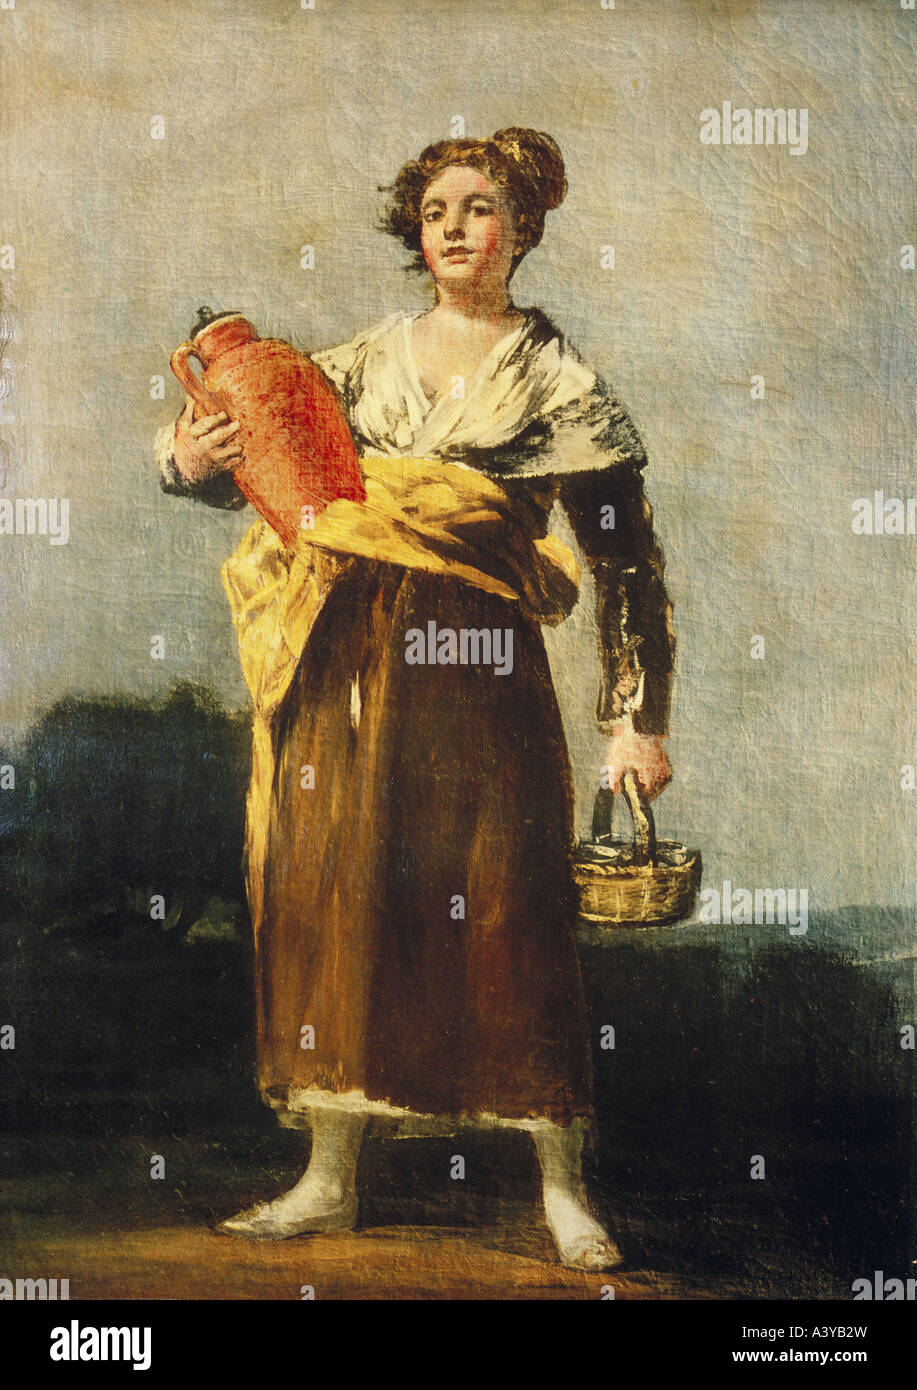 'fine arts, Goya y Lucientes, Francisco de, (1746 - 1828), painting, 'woman carrying water', circa 1810, oil on canvas, 68 cm Stock Photo